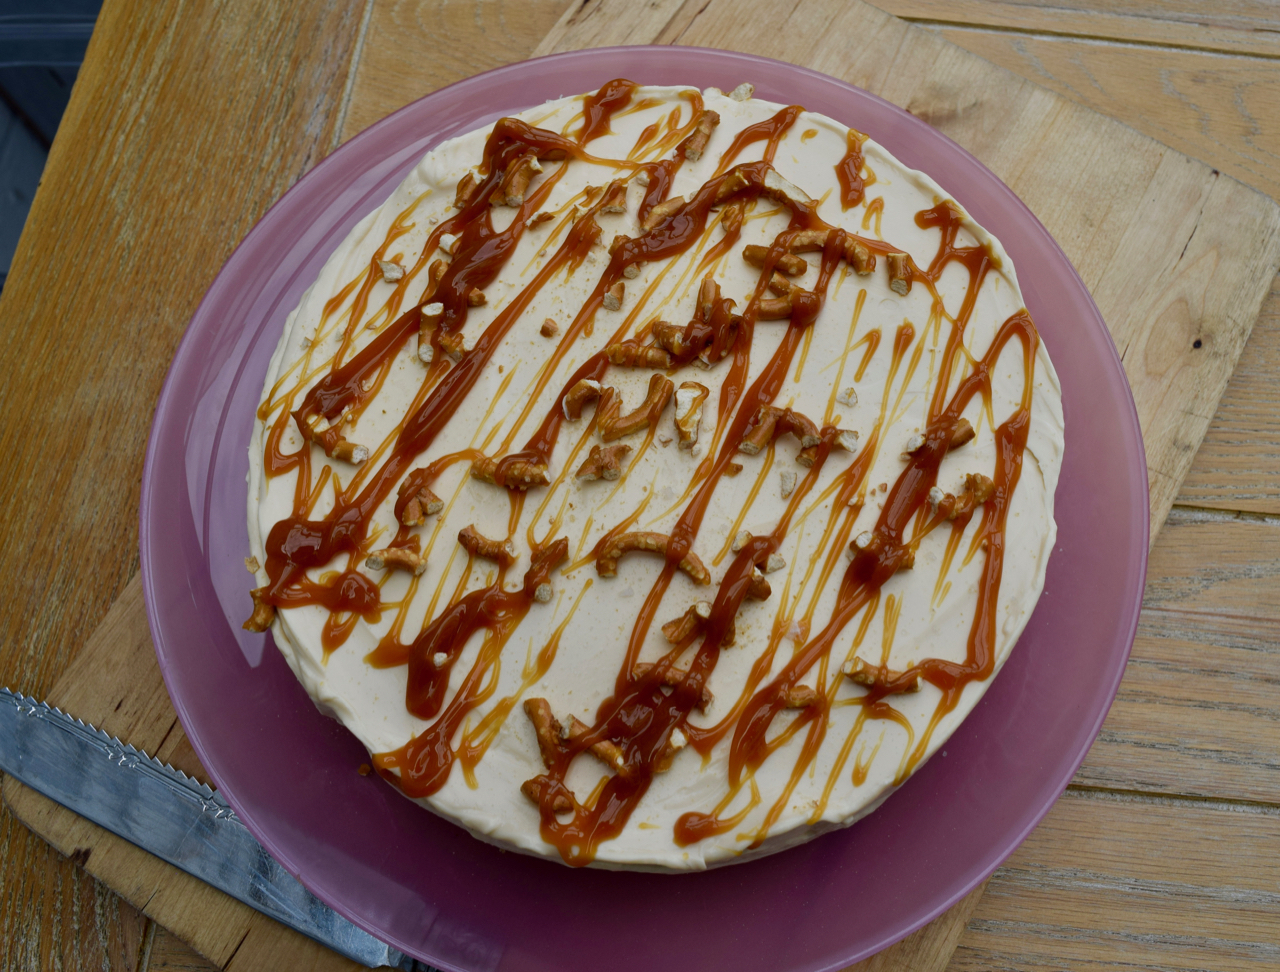 Salted-caramel-cheesecake-recipe-lucyloves-foodblog